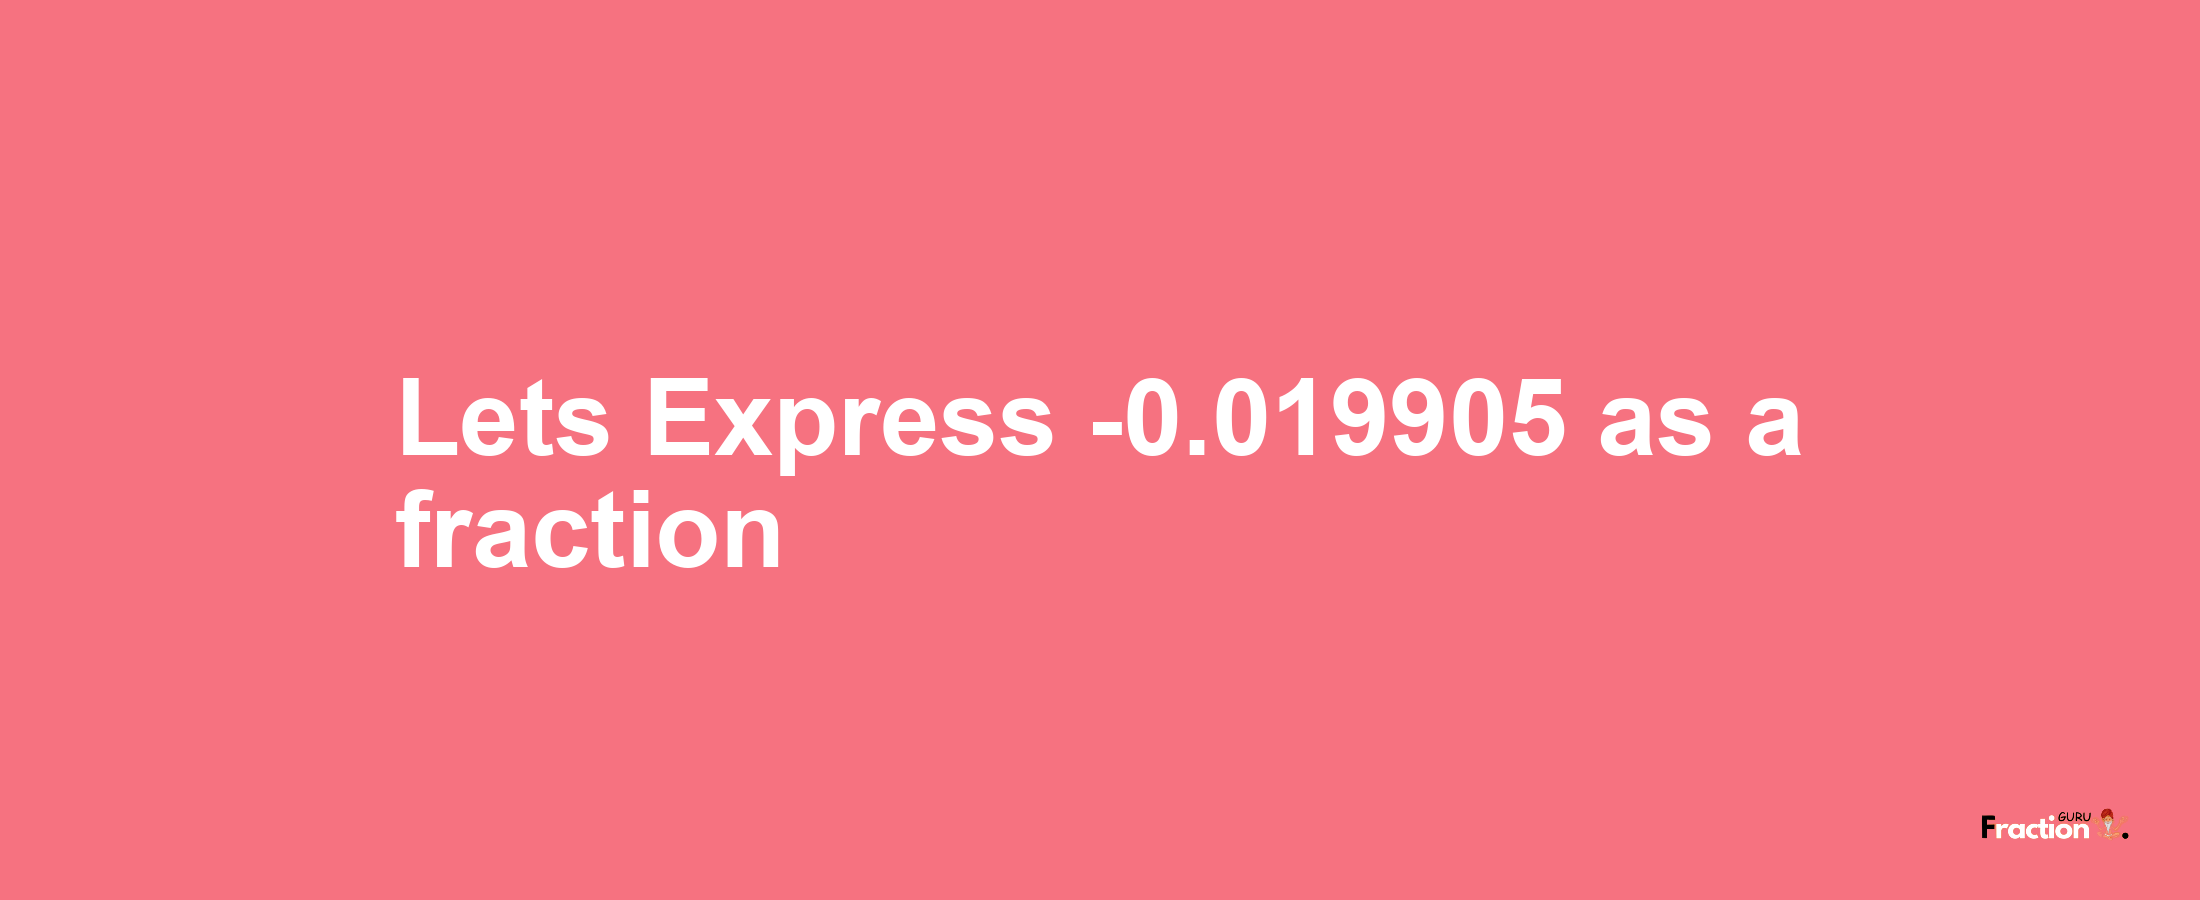 Lets Express -0.019905 as afraction